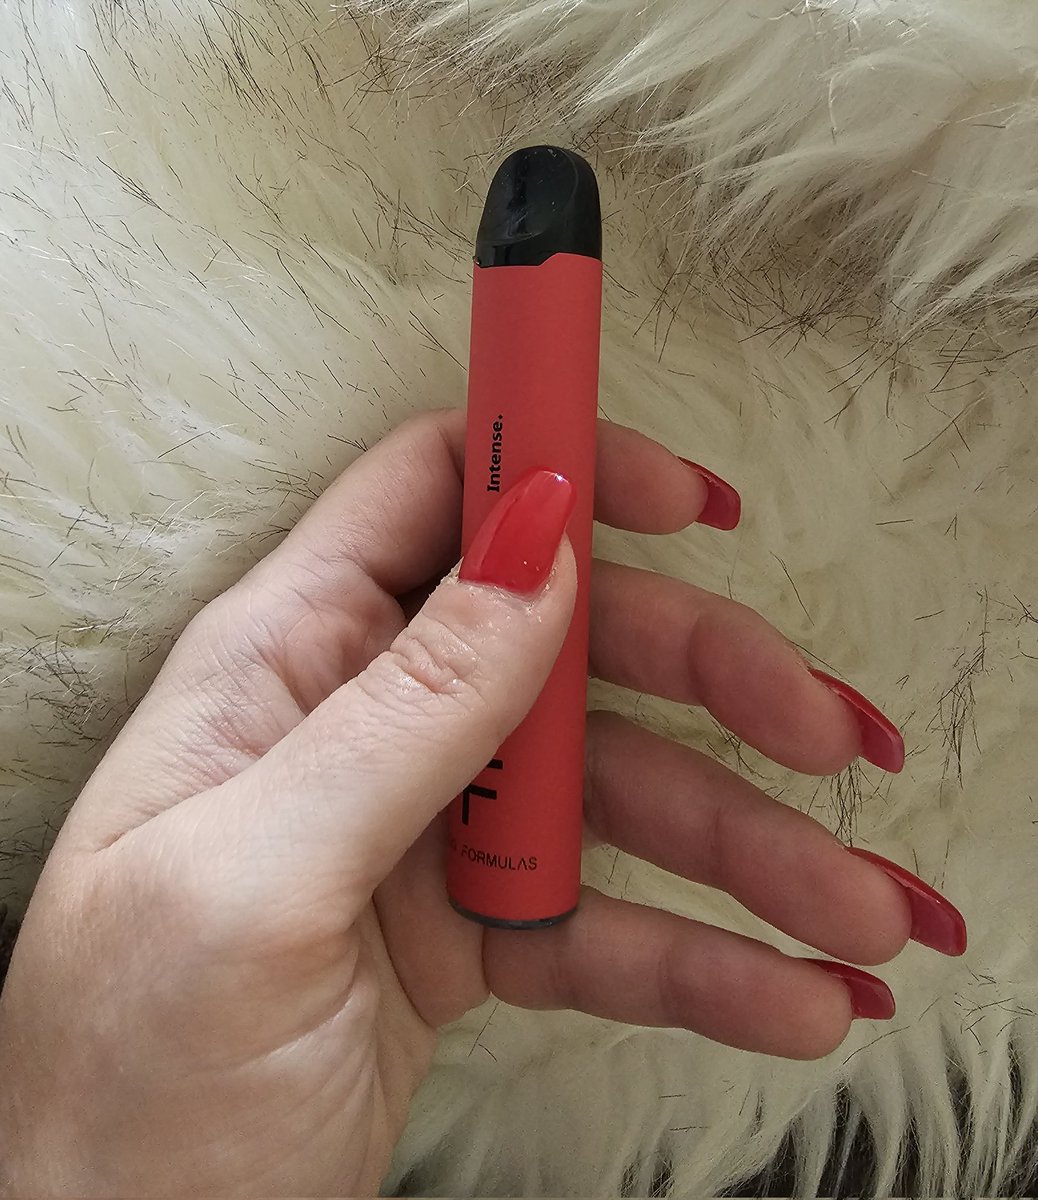 My vape is about to die, so I need a good little bitch to send for a couple new ones 😘

$50 to my PayPal immediately 👏👏

Findom femdom #FurGoddess #furqueen #vapequeen #furblanket #reimbursement paypig #furs #furangel